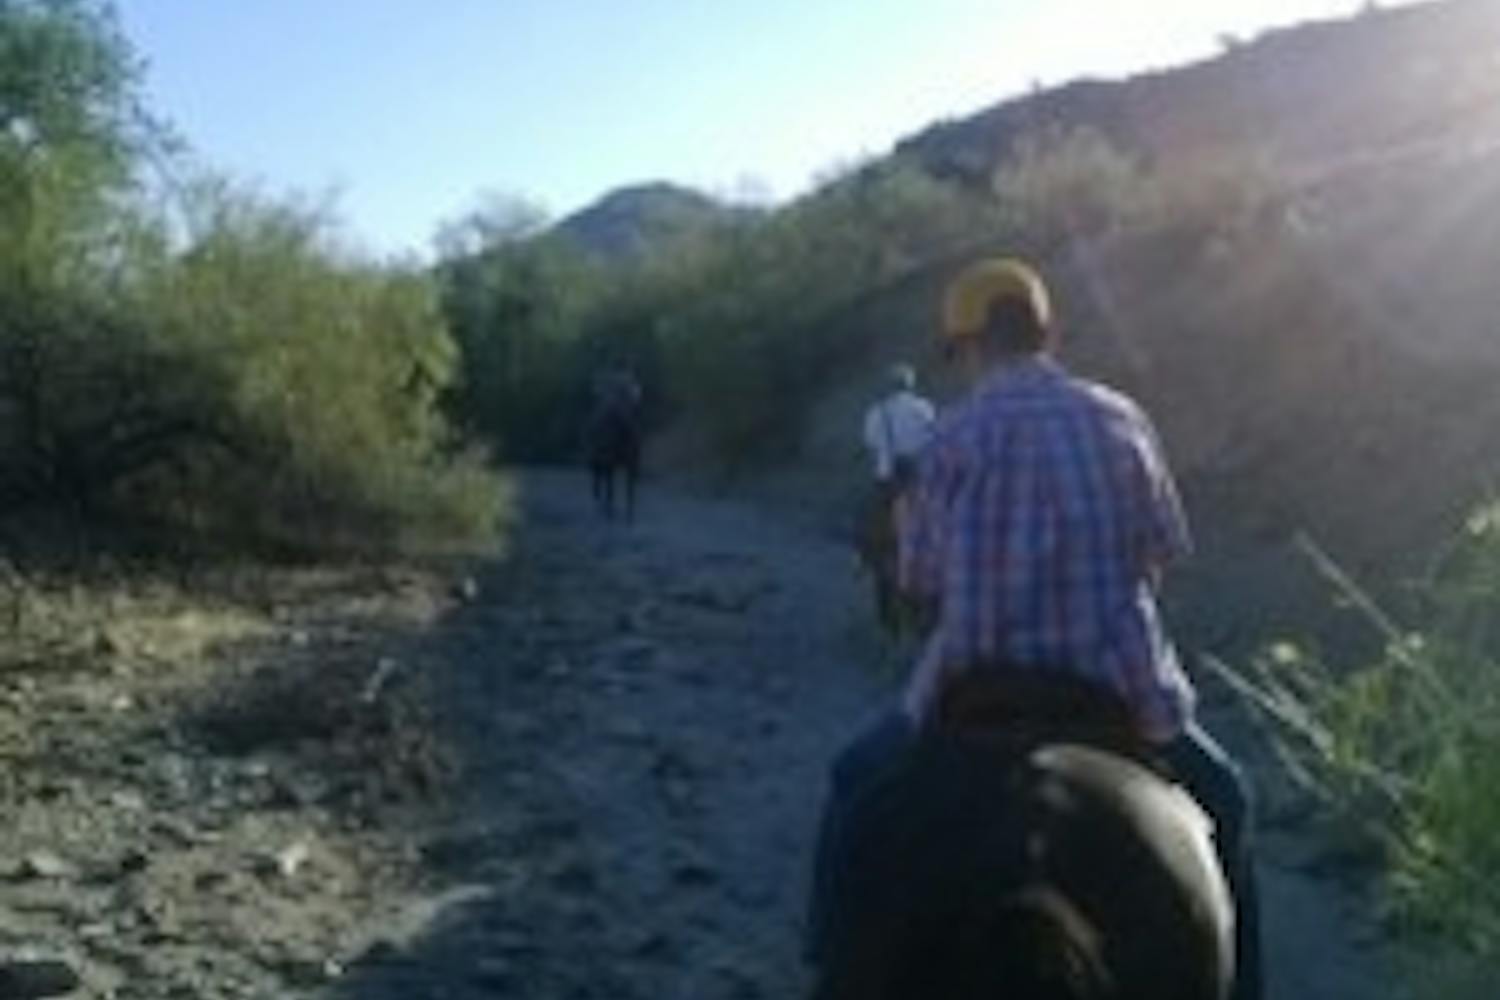 A summer day spent horseback riding at South Mountain